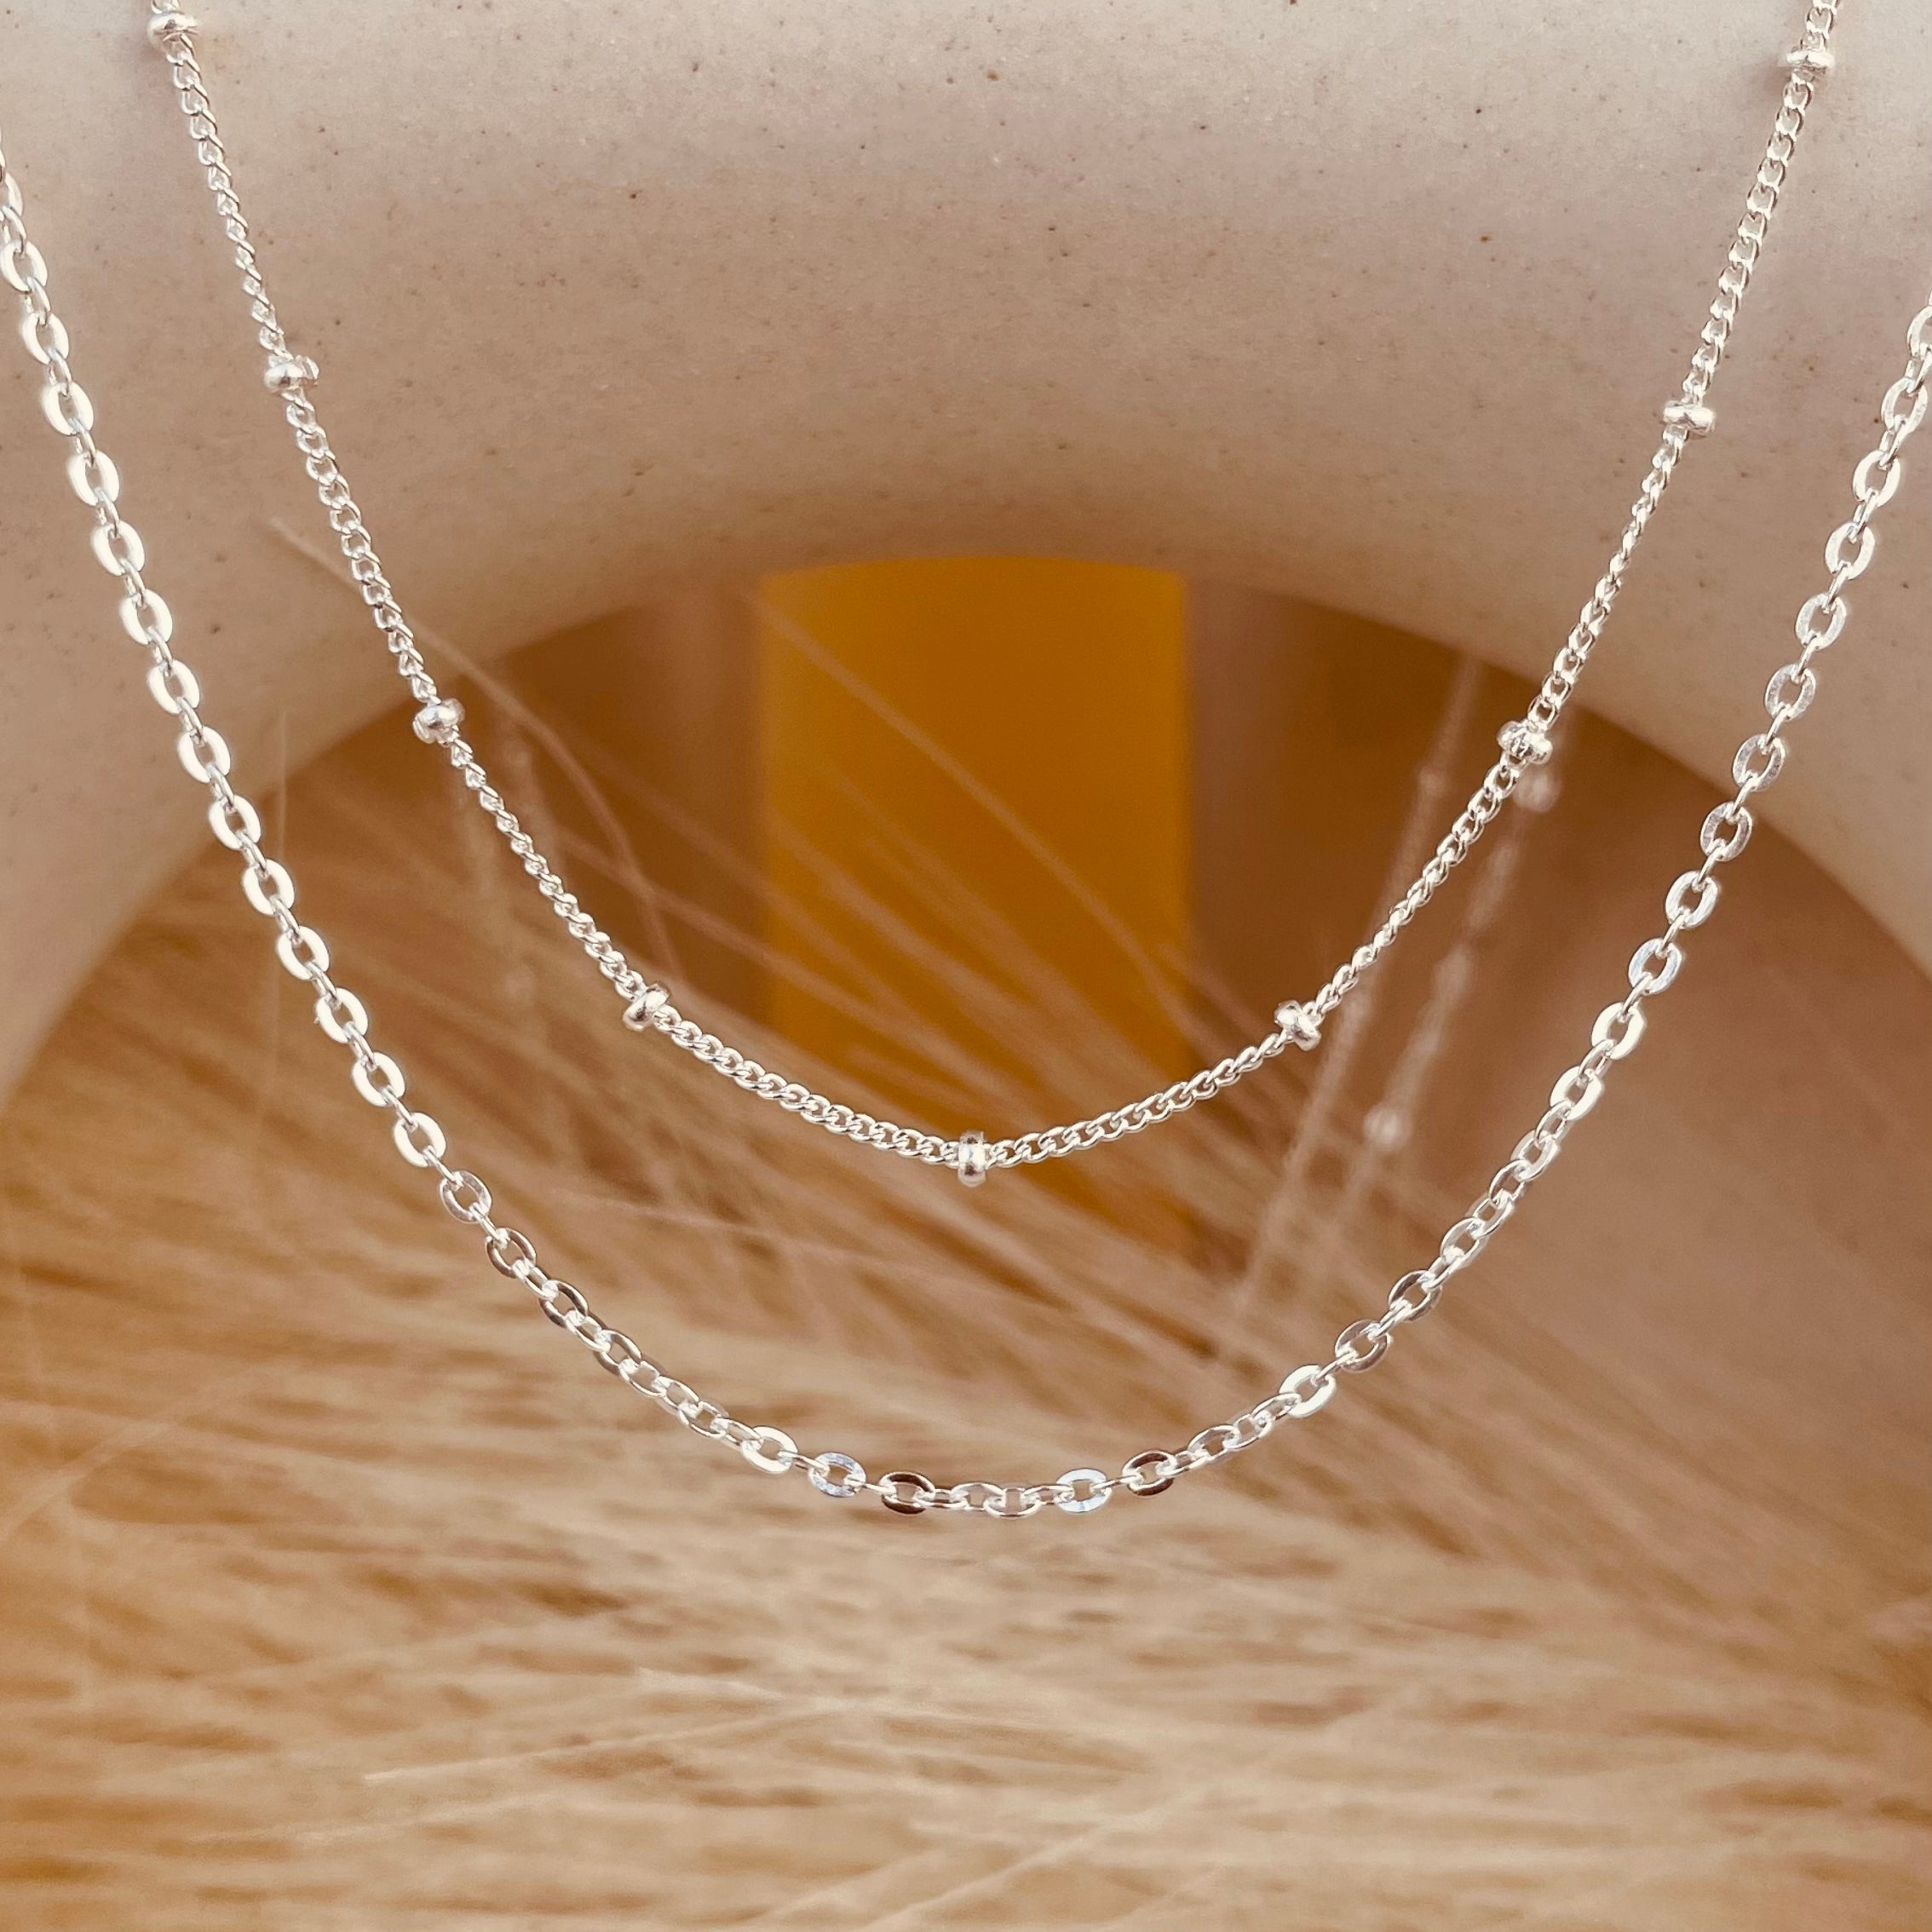 Duo of Satellite and Dainty Sitara Necklace - Octonov 